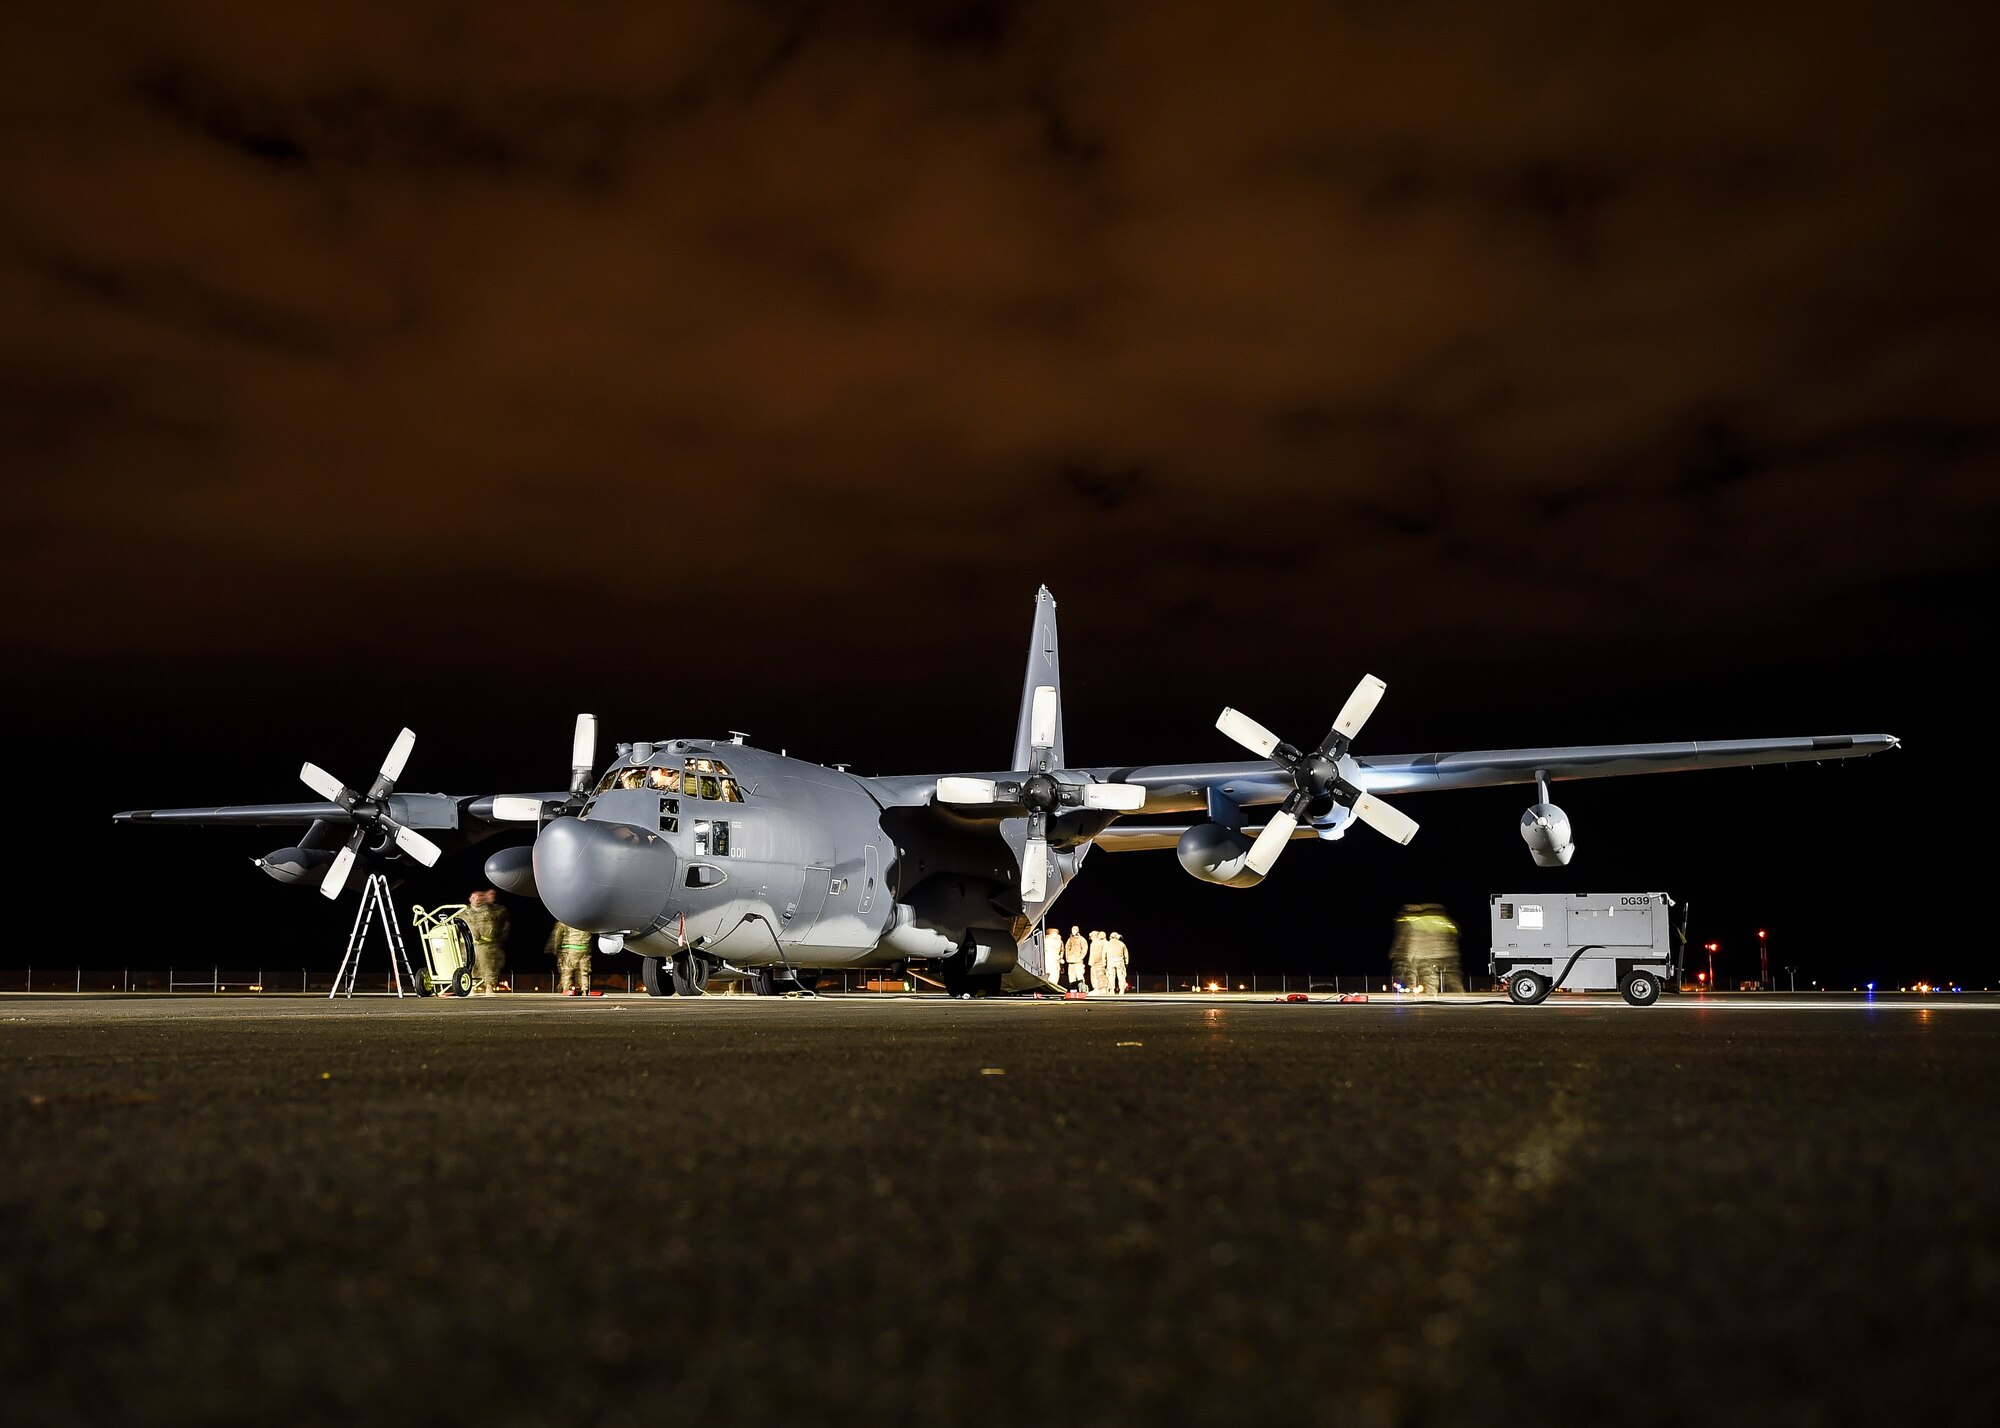 Airmen with the 1st Special Operations Wing inspect an MC-130H Combat Talon II after a forward area refueling point operation as part of exercise Ultimate Archer at Hill Air Force Base, Utah, Nov. 3, 2015. Airmen with the 1st Special Operations Wing practiced various skills required for overseas contingency operations during the exercise. (U.S. Air Force photo by Airman Kai White)